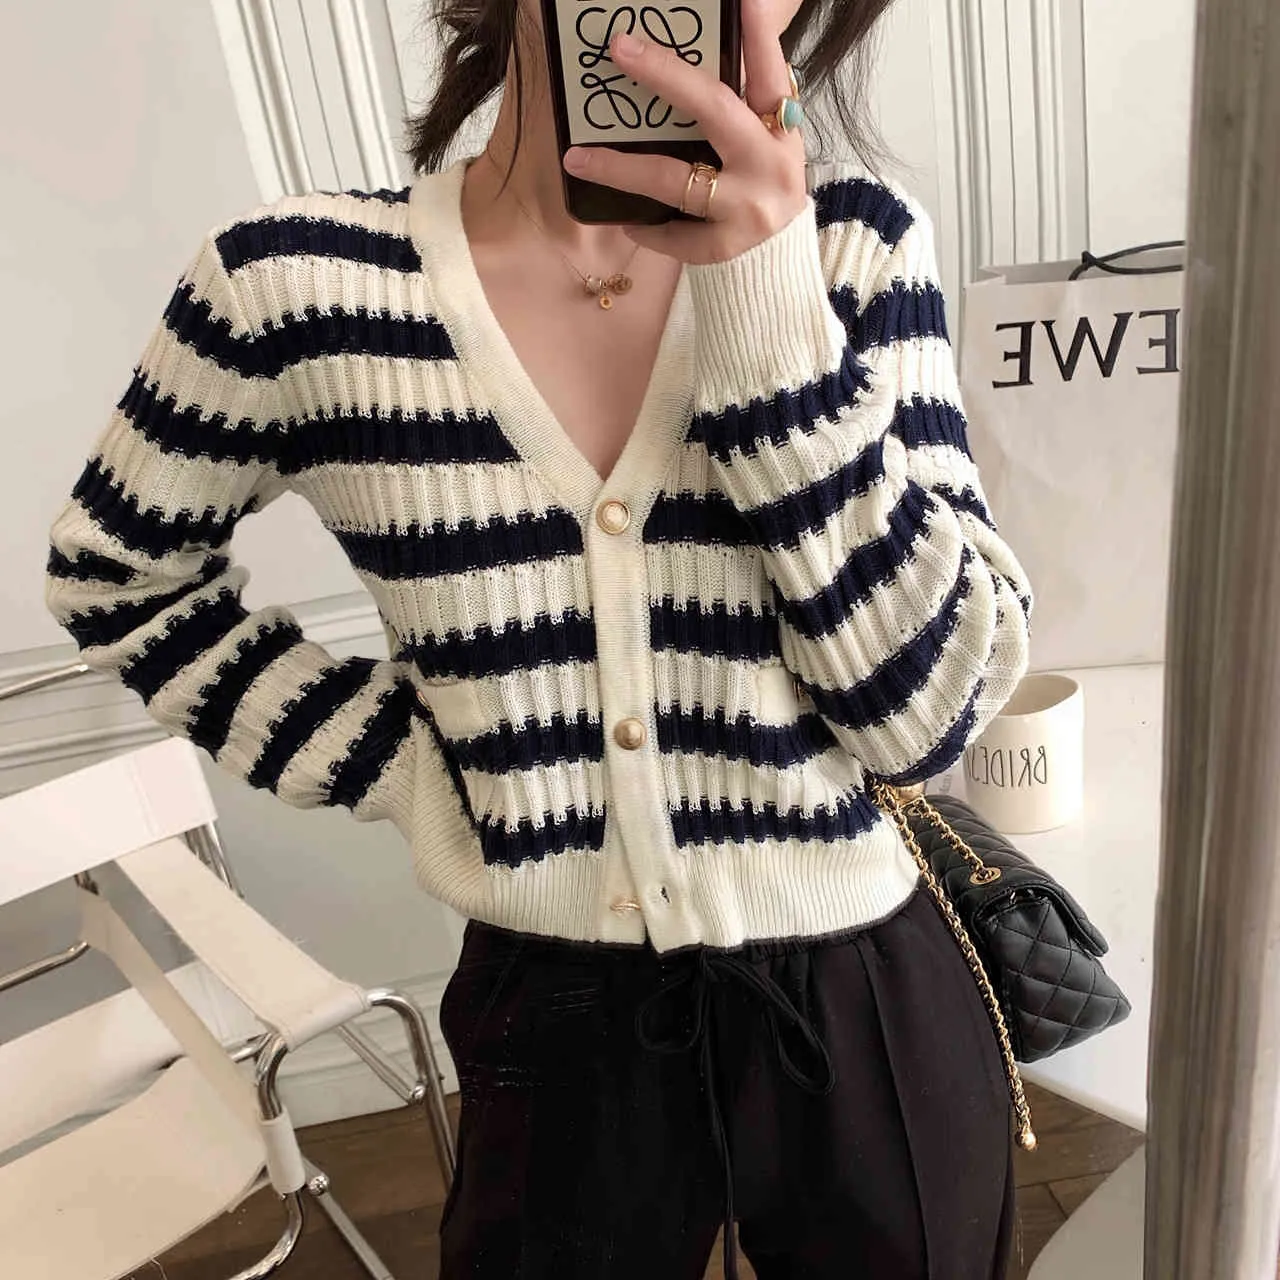 Women Casual Cardigans Short Striped Knitted Jackets Black and White Button Up V neck Long Sleeve Sweater 210430